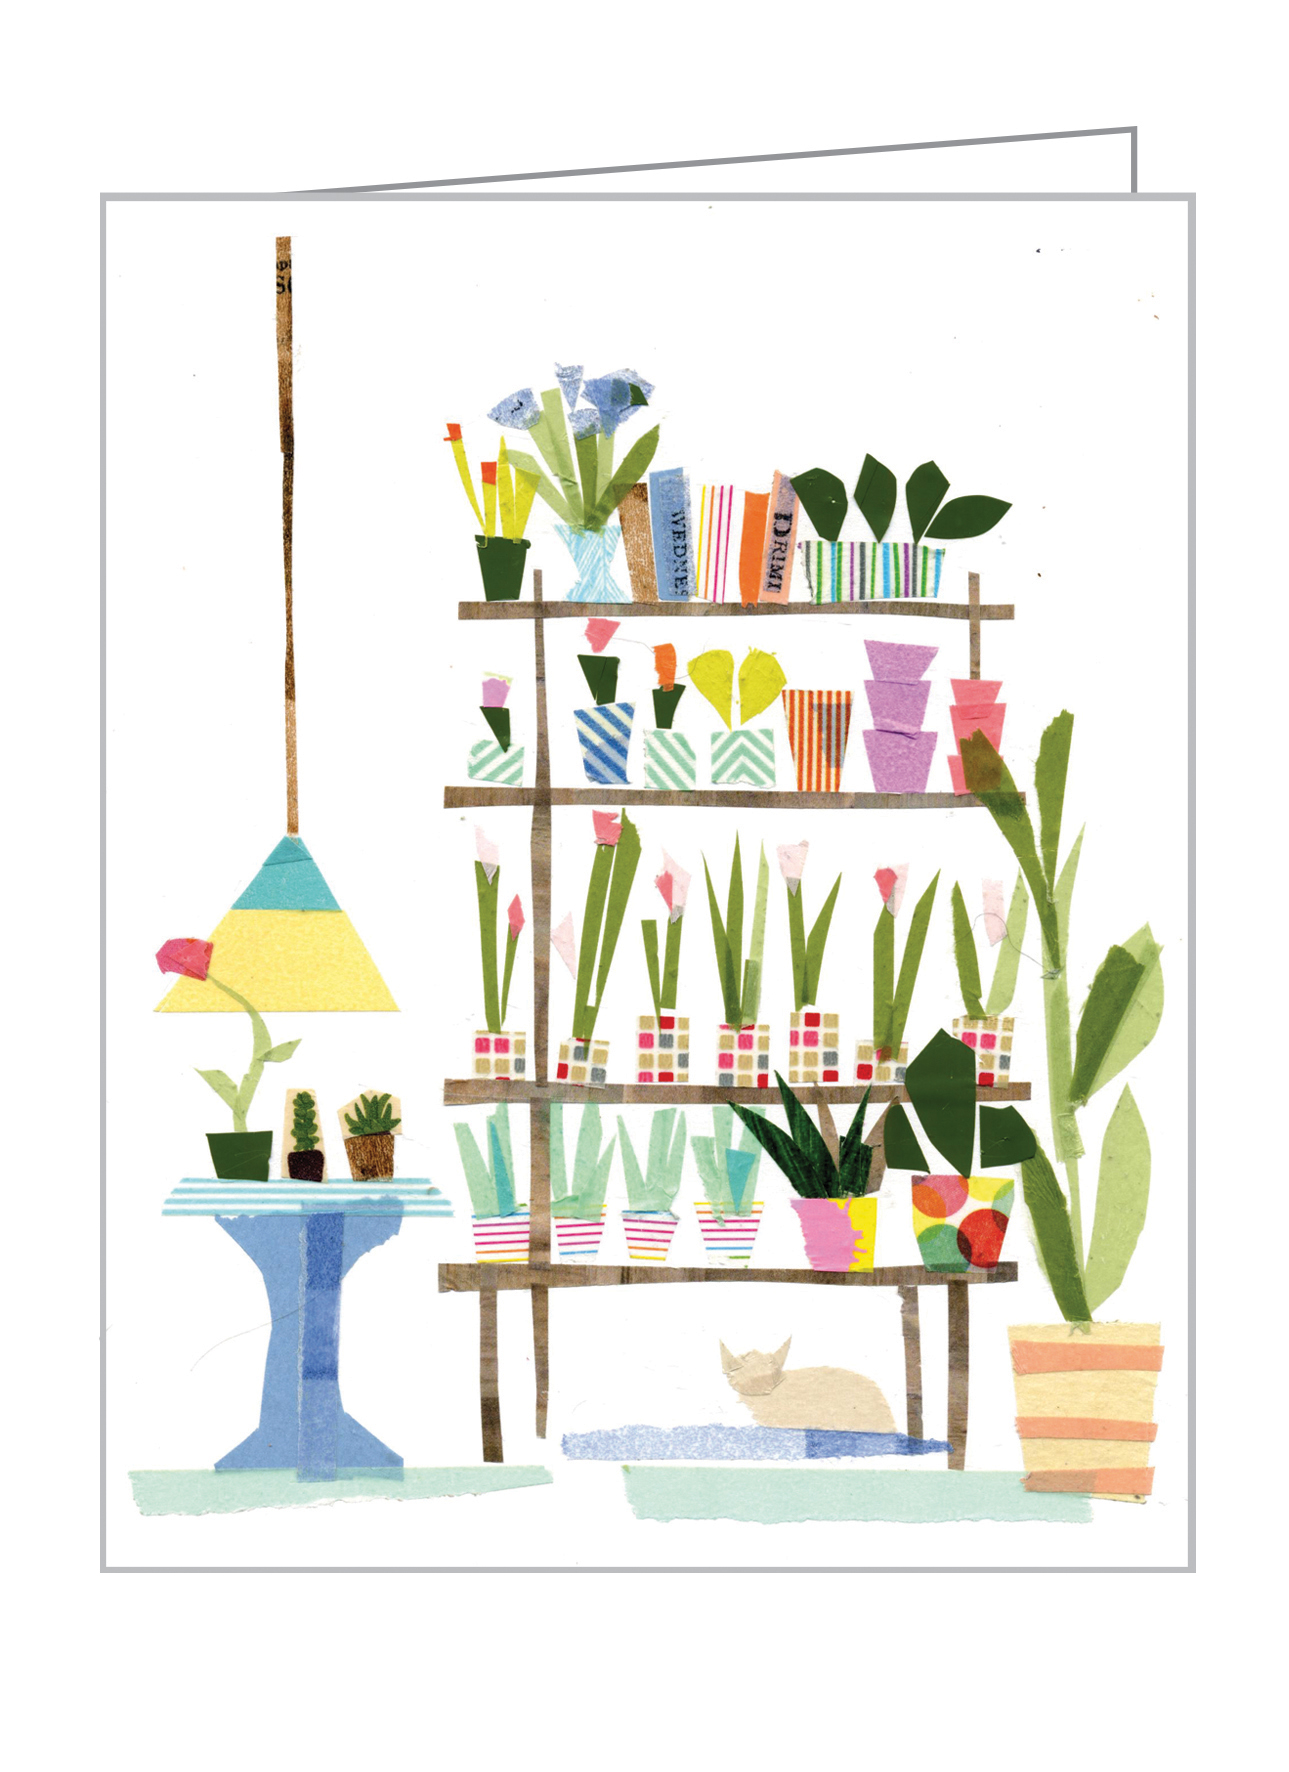 Maria Carluccio's design of shelves full of potted plants and books, on notecard box, teNeues Stationery.